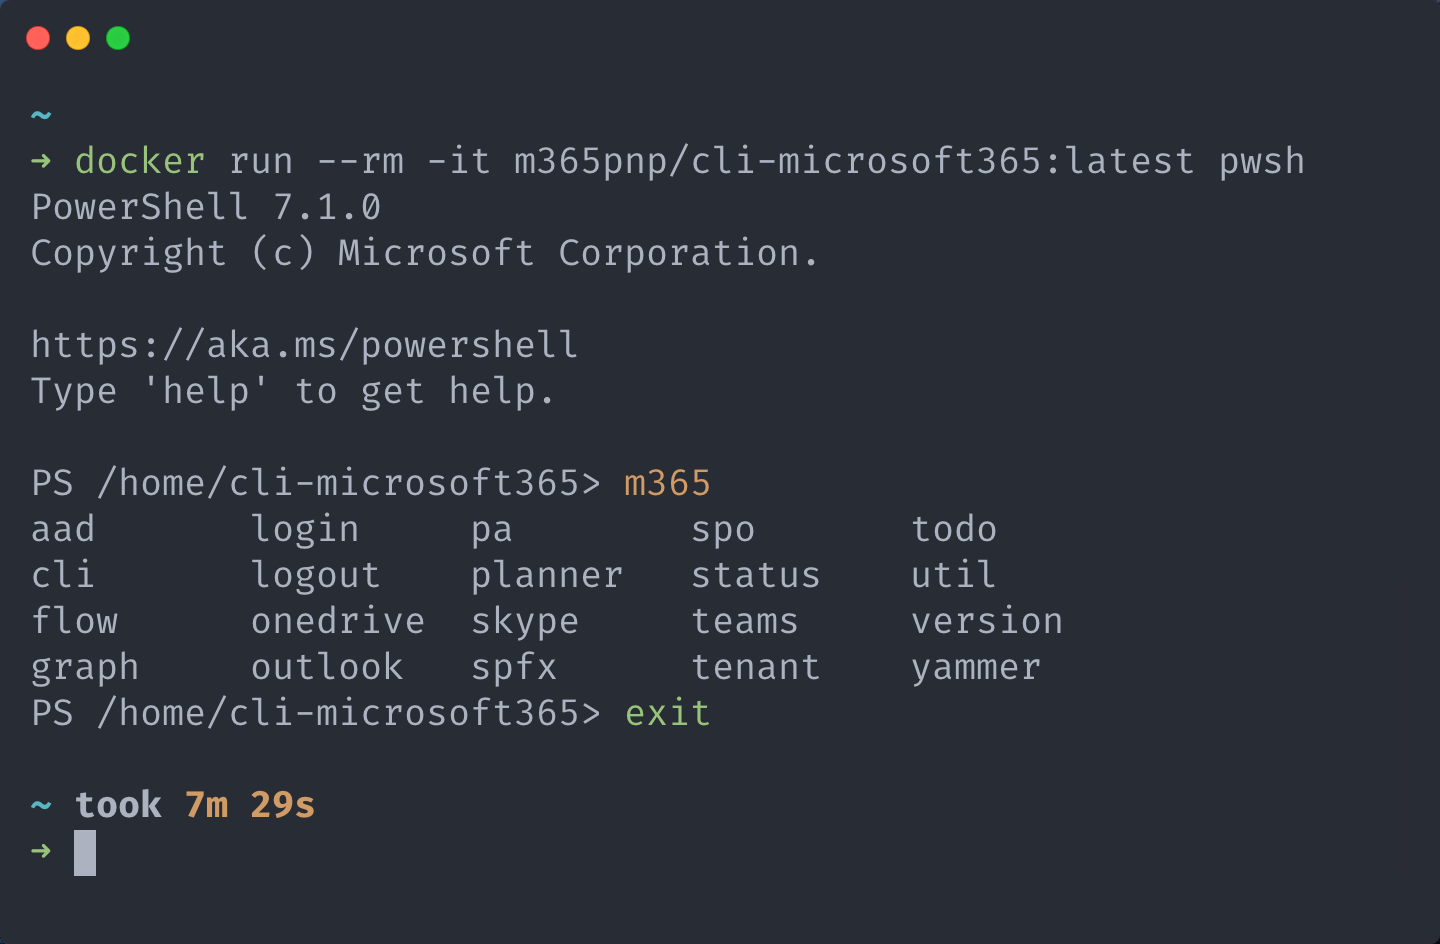 Terminal displaying a PowerShell interactive terminal session inside a docker container using m365pnp/cli-microsoft365:latest image, the prompt is at the host machine level after exit has been executed inside the container